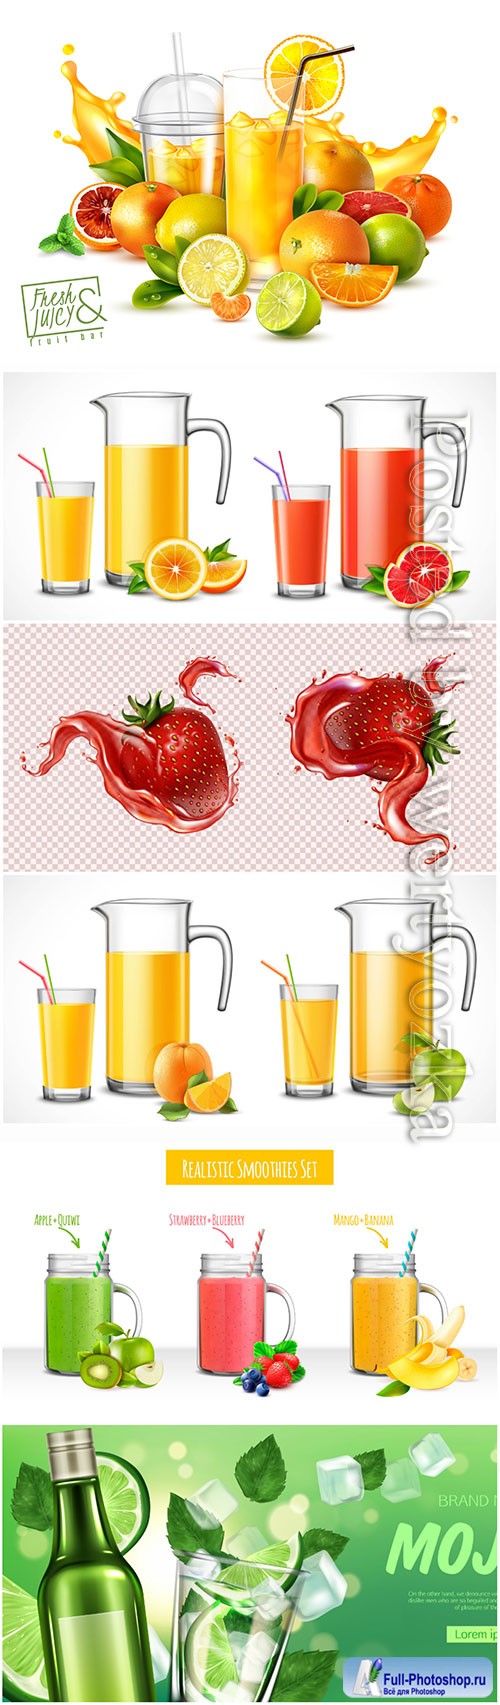 Fruits, fresh juices and drinks vector illustration